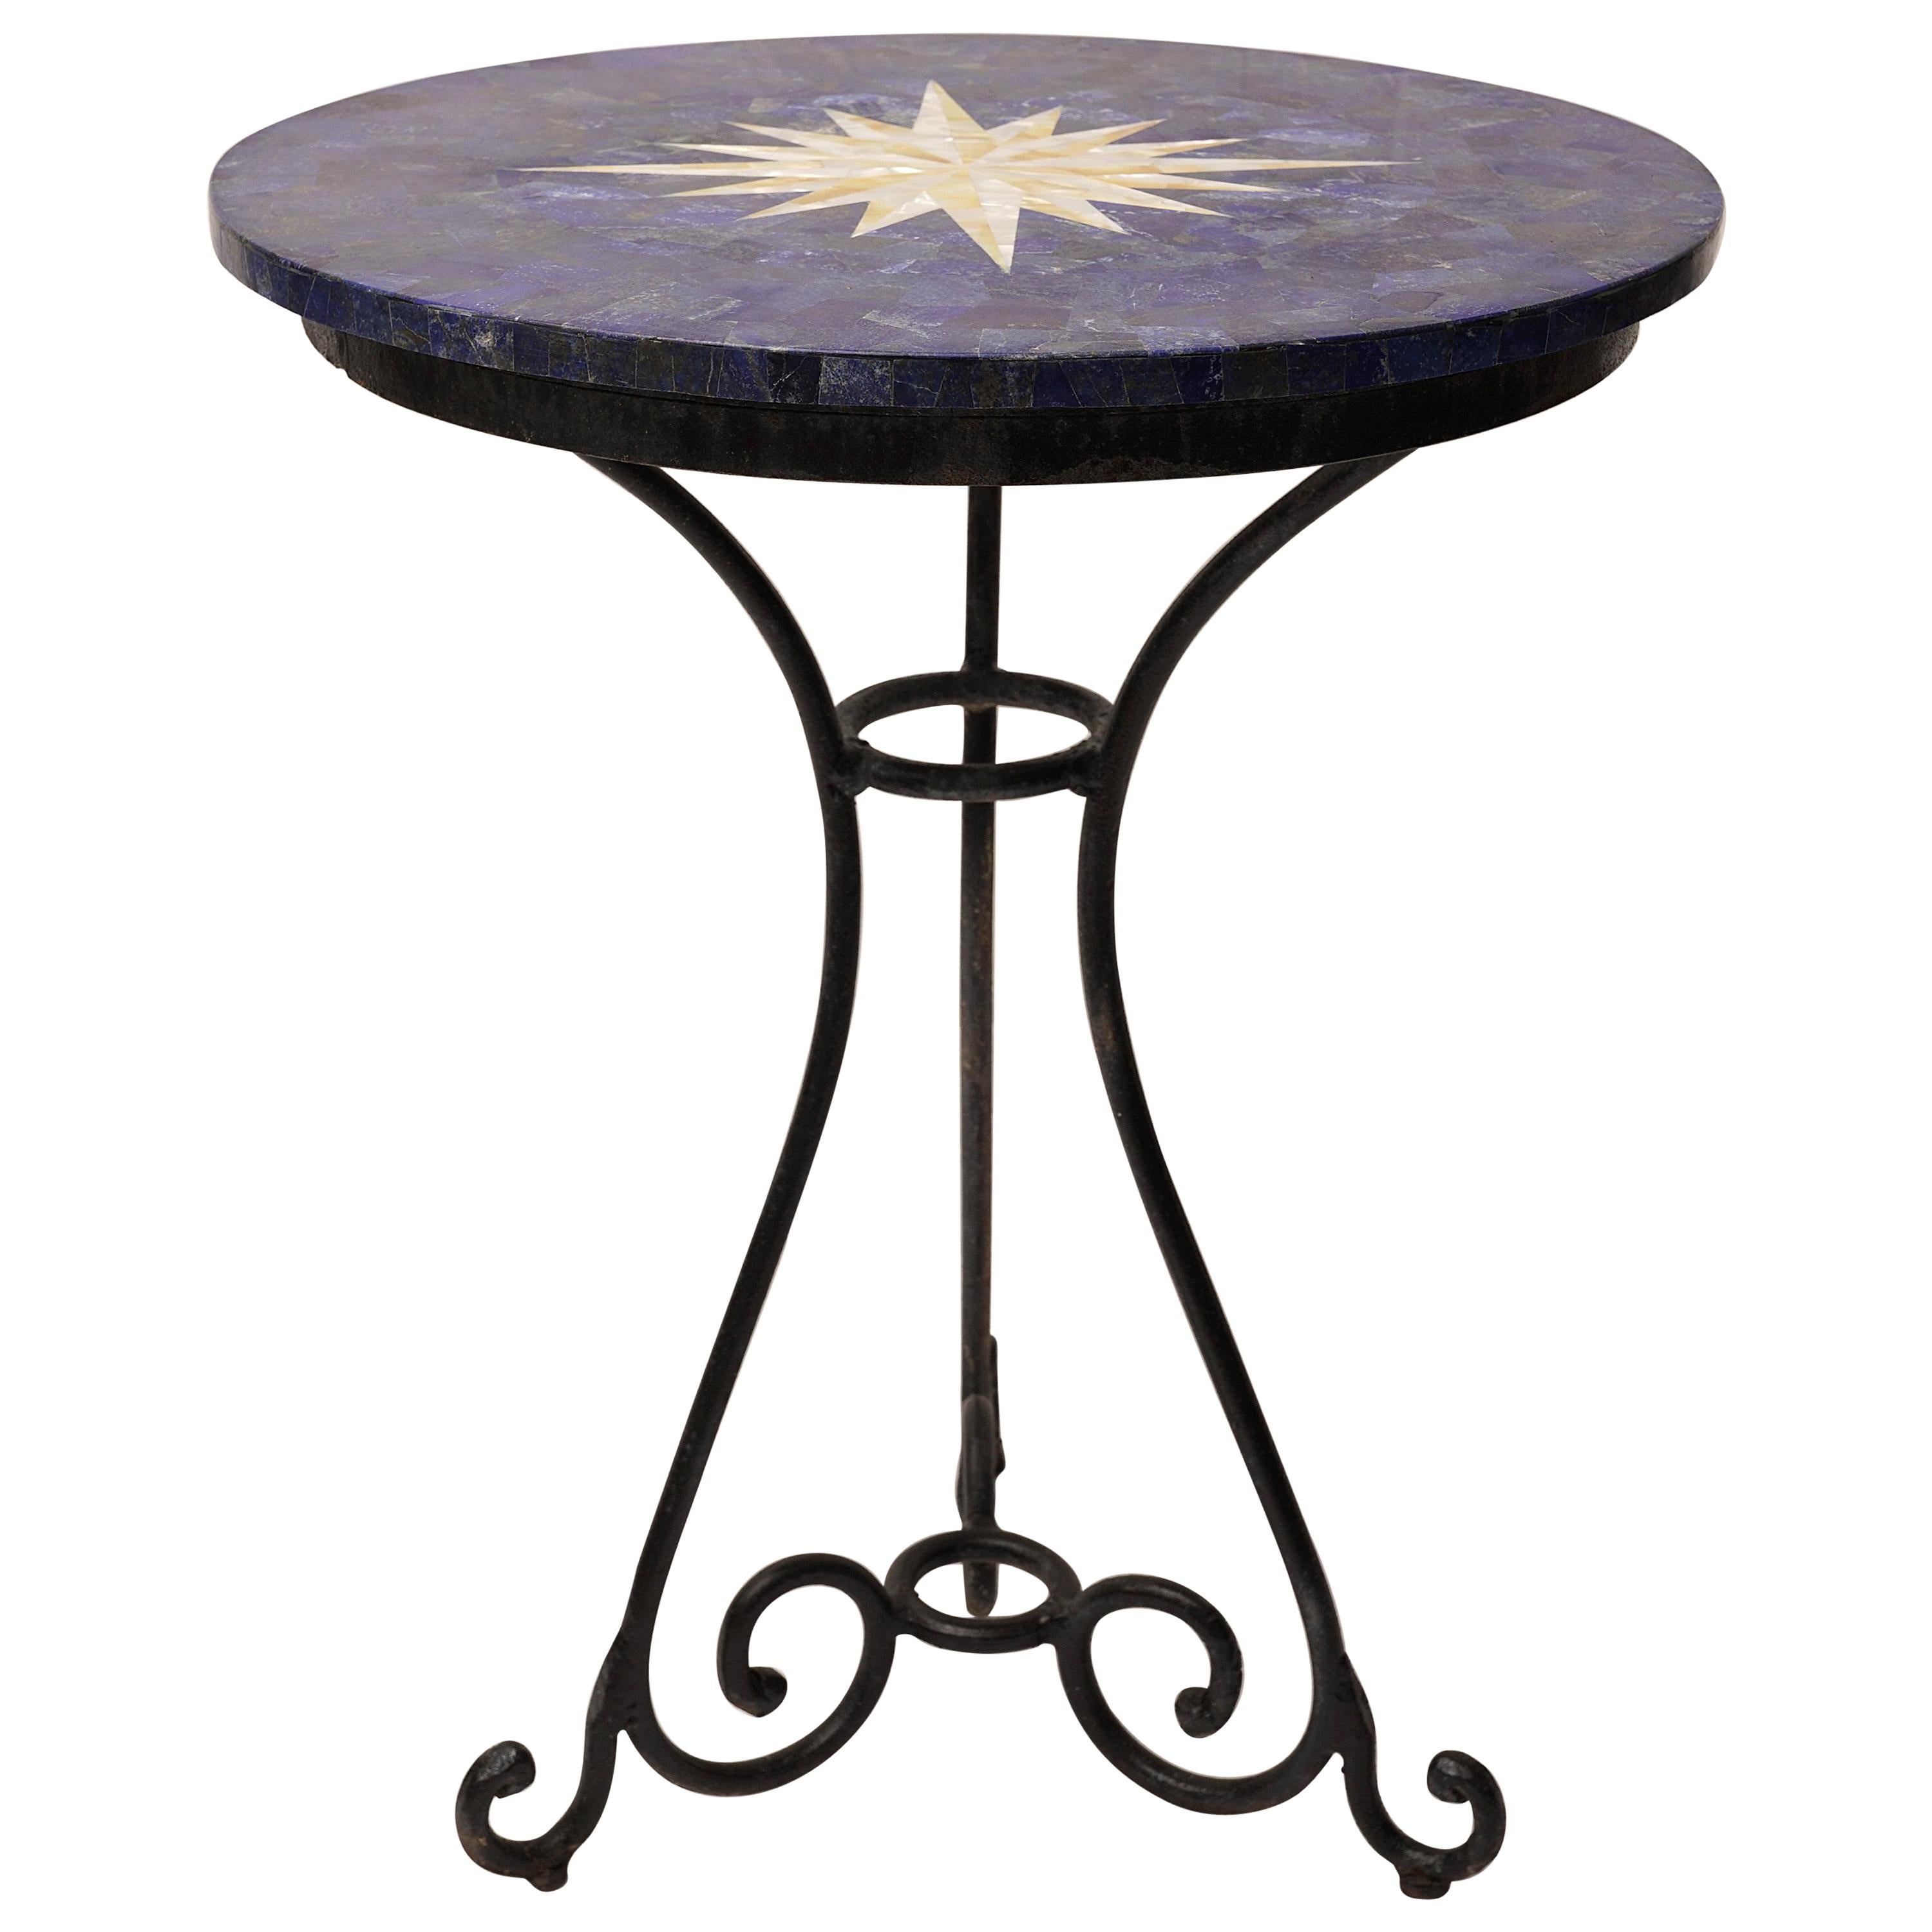 An amazing pietra dura table of lapis lazuli complemented with an inlaid mother of pearl compass rose on the top. Sits on a hand-wrought iron base. Many versatile uses as a dining cafe table, centre table, side table, etc.   Use inside or out.

I